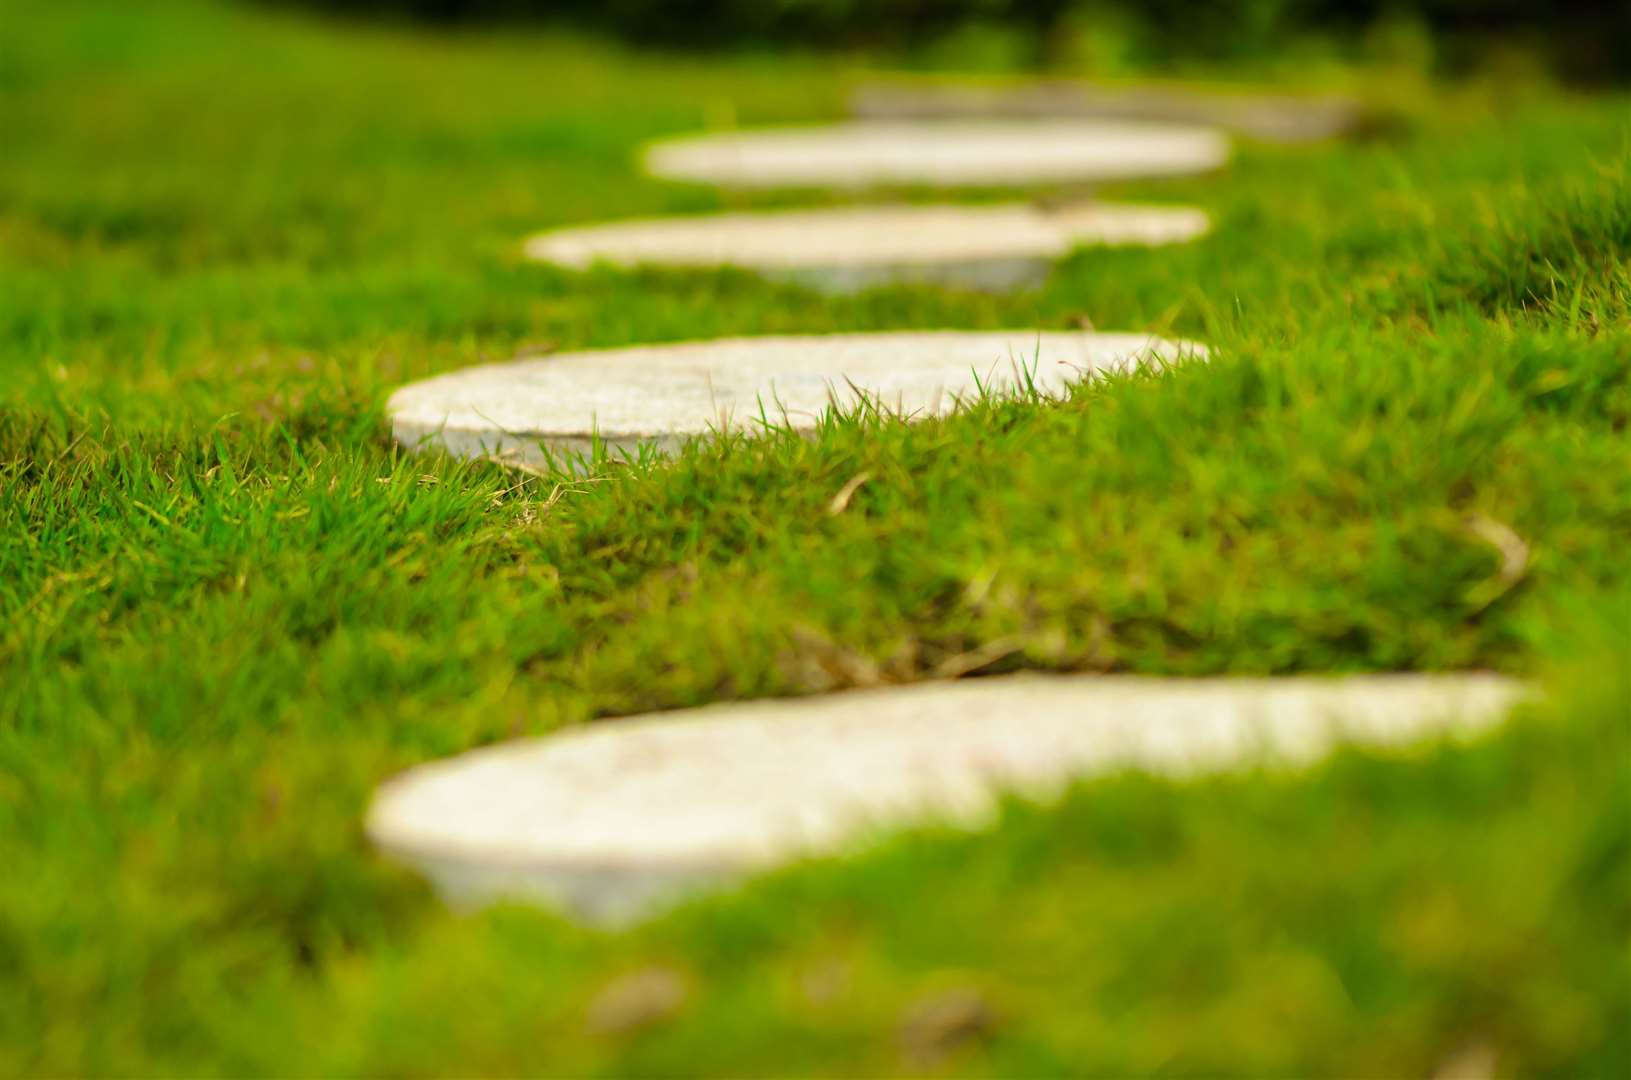 Lay stepping stones or create a path to avoid walking on sodden soil and grass. Picture: iStock/PA